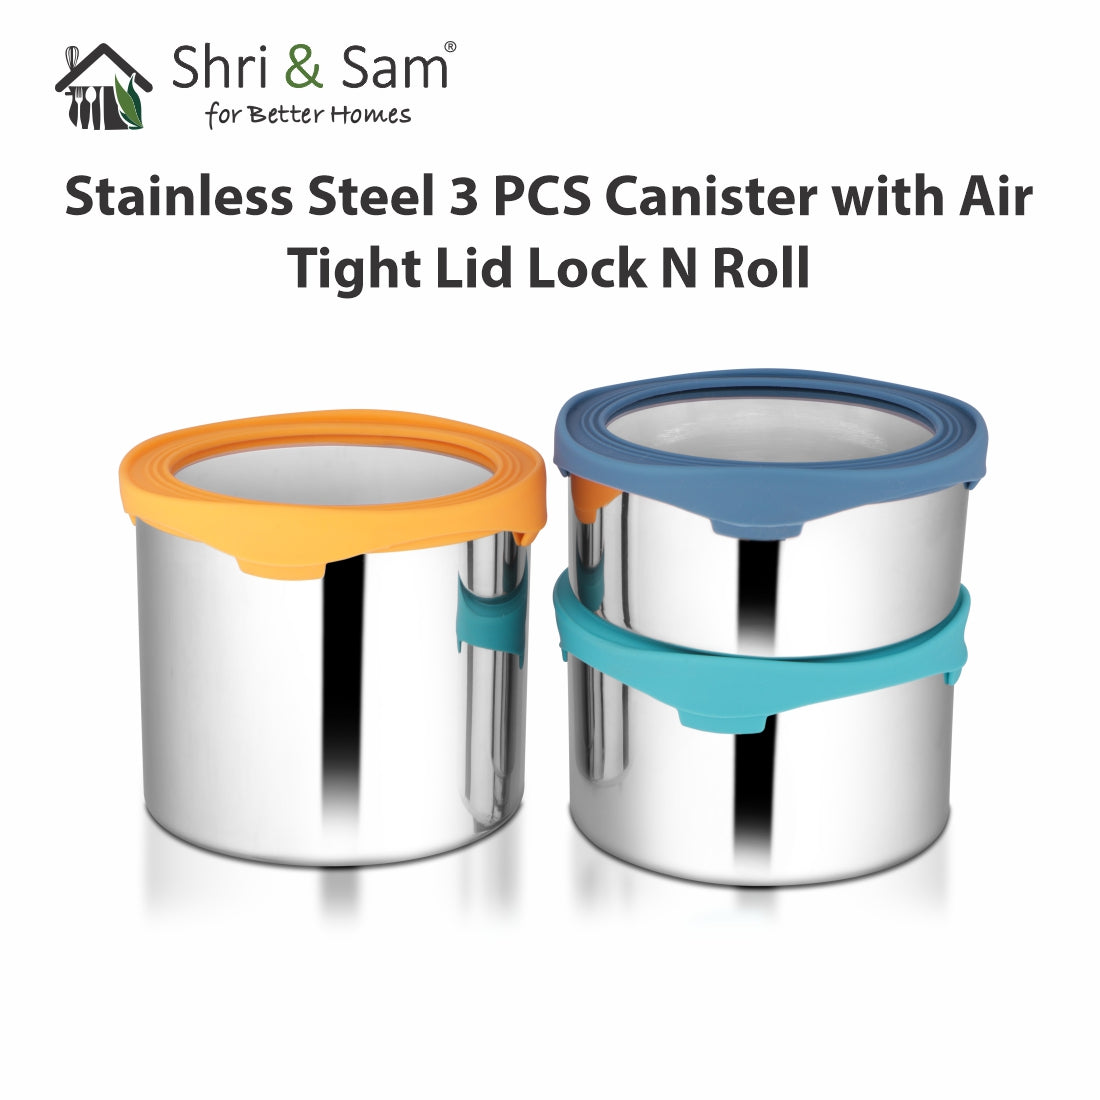 Stainless Steel 3 PCS Canister with Air Tight Lid Lock N Roll